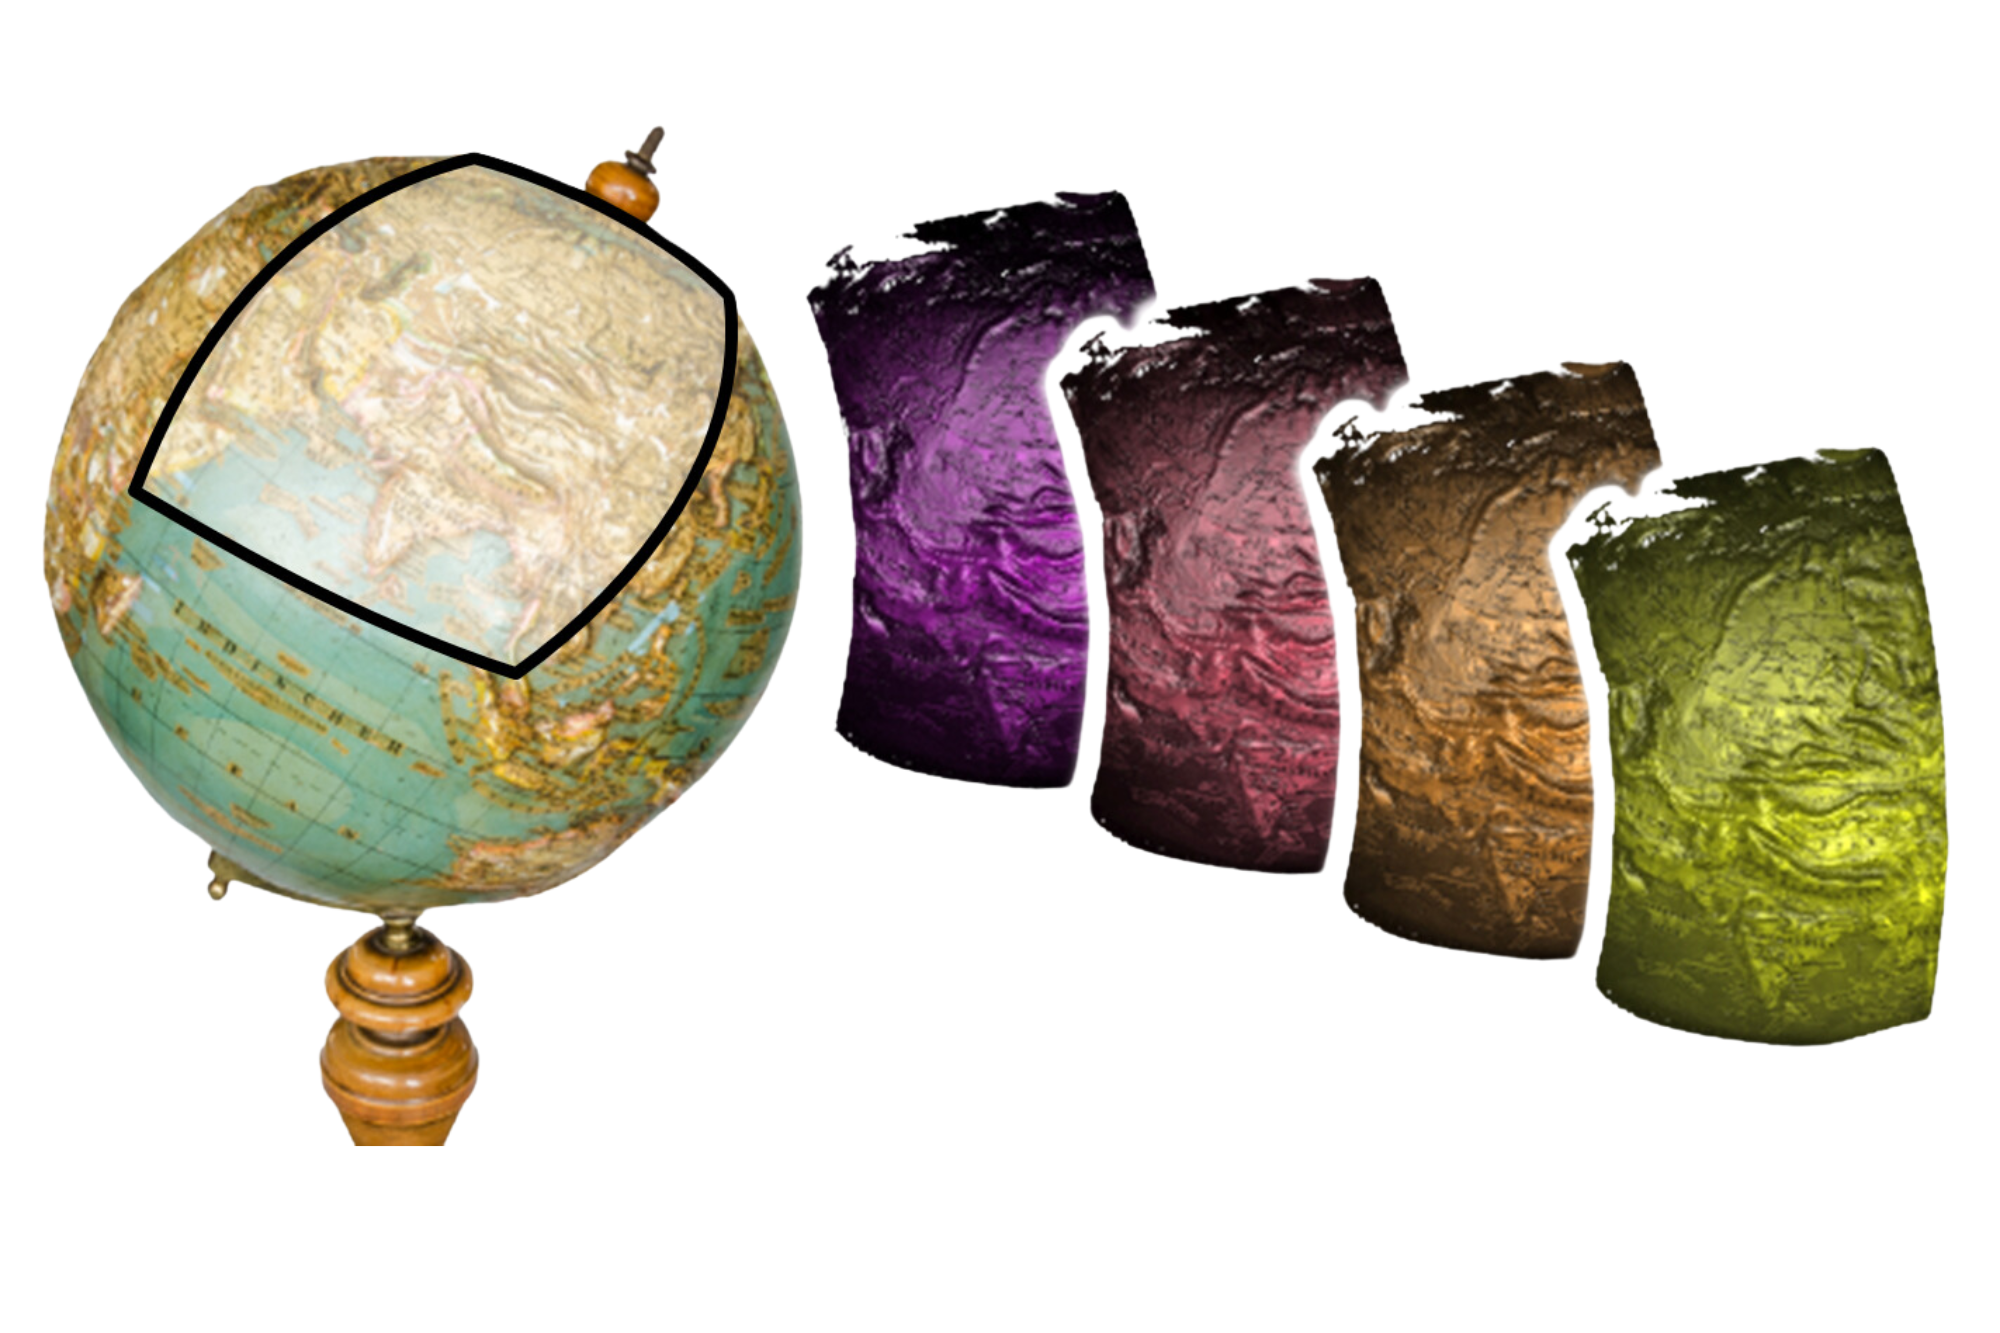 Digitalisation of a historical relief globe